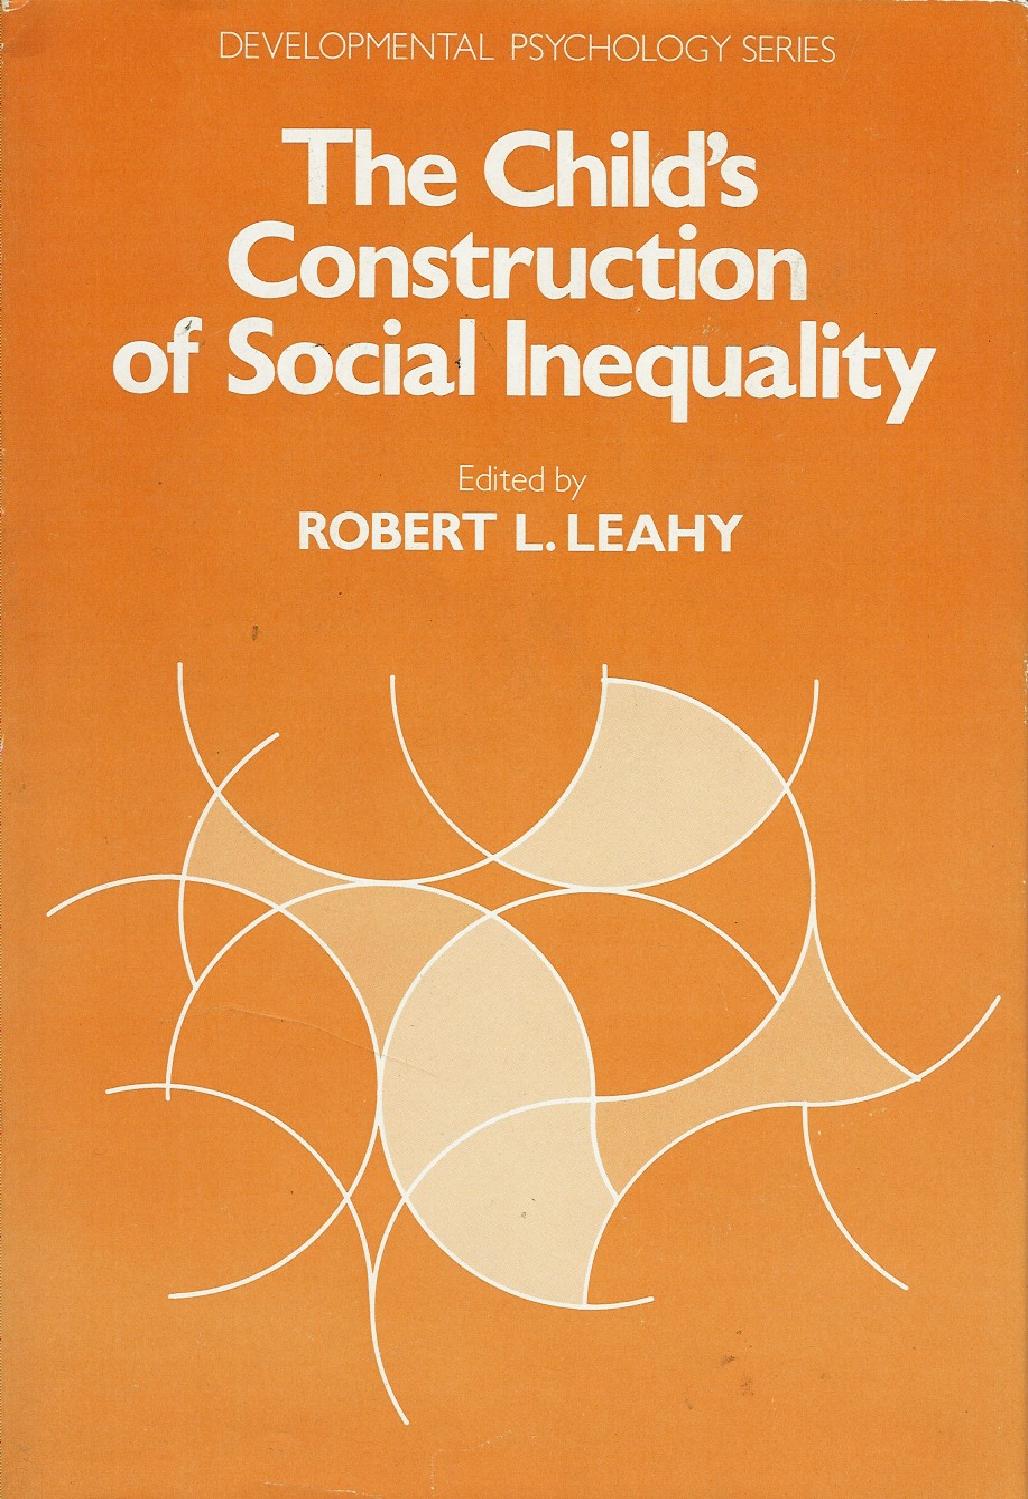 social inequality book cover